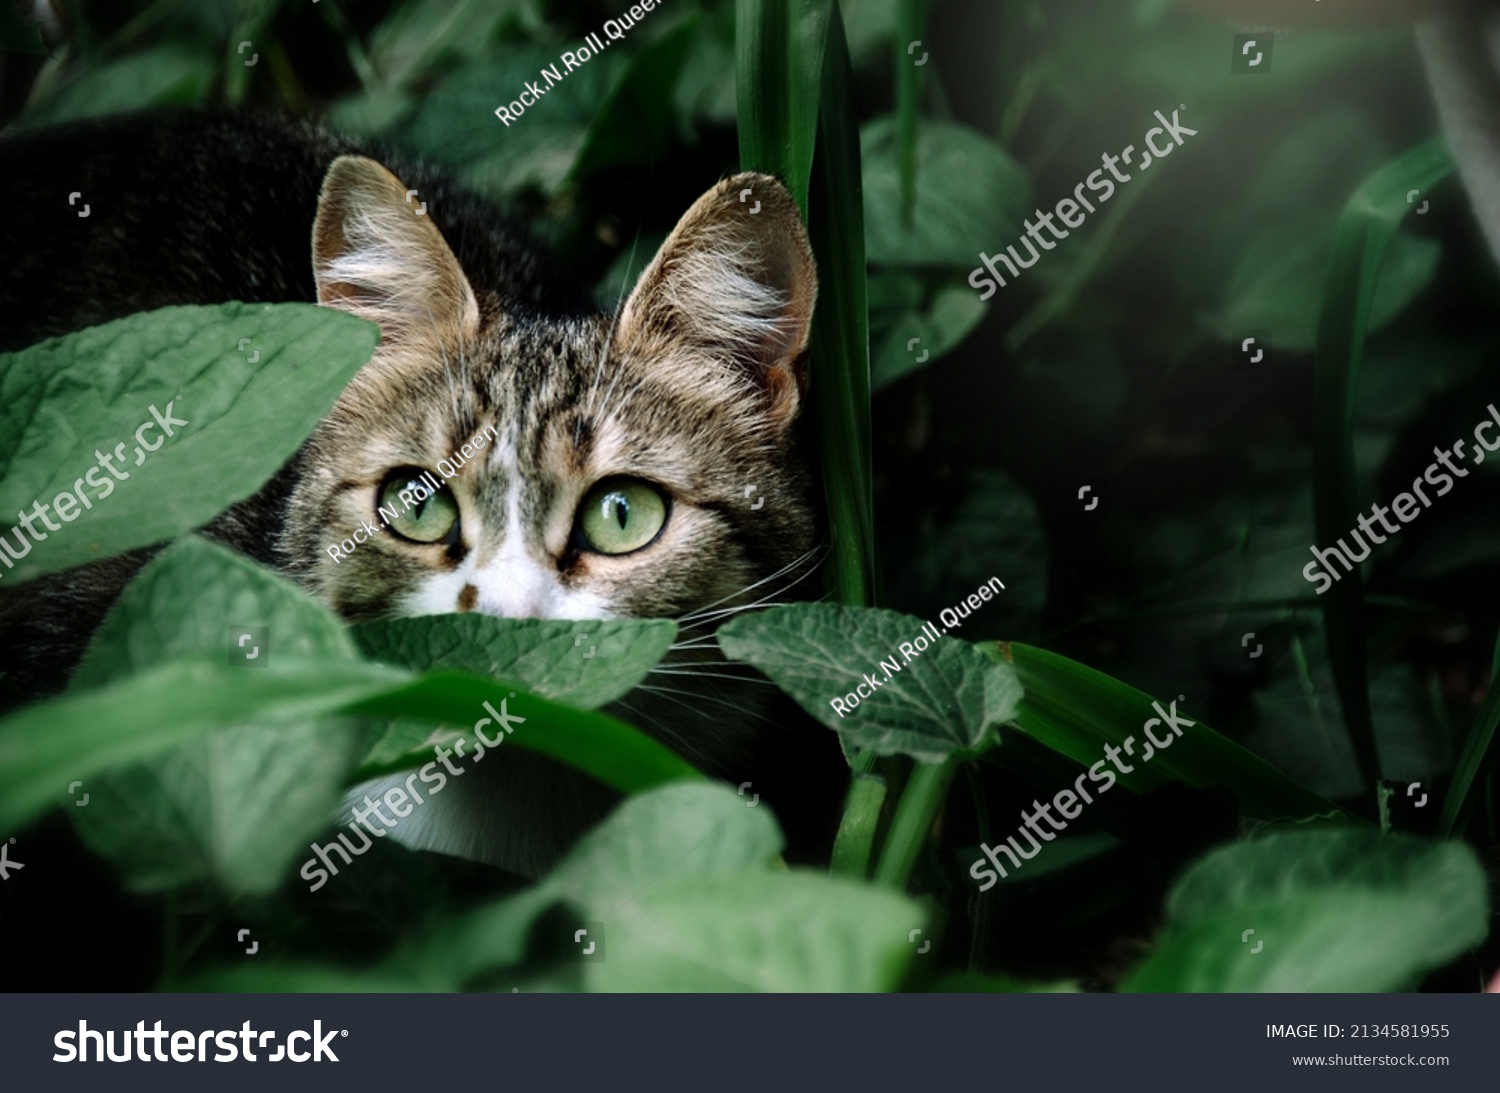 Cute predator among jungles. Beutiful cat with green eyes hides in green leaves in the garden #2134581955